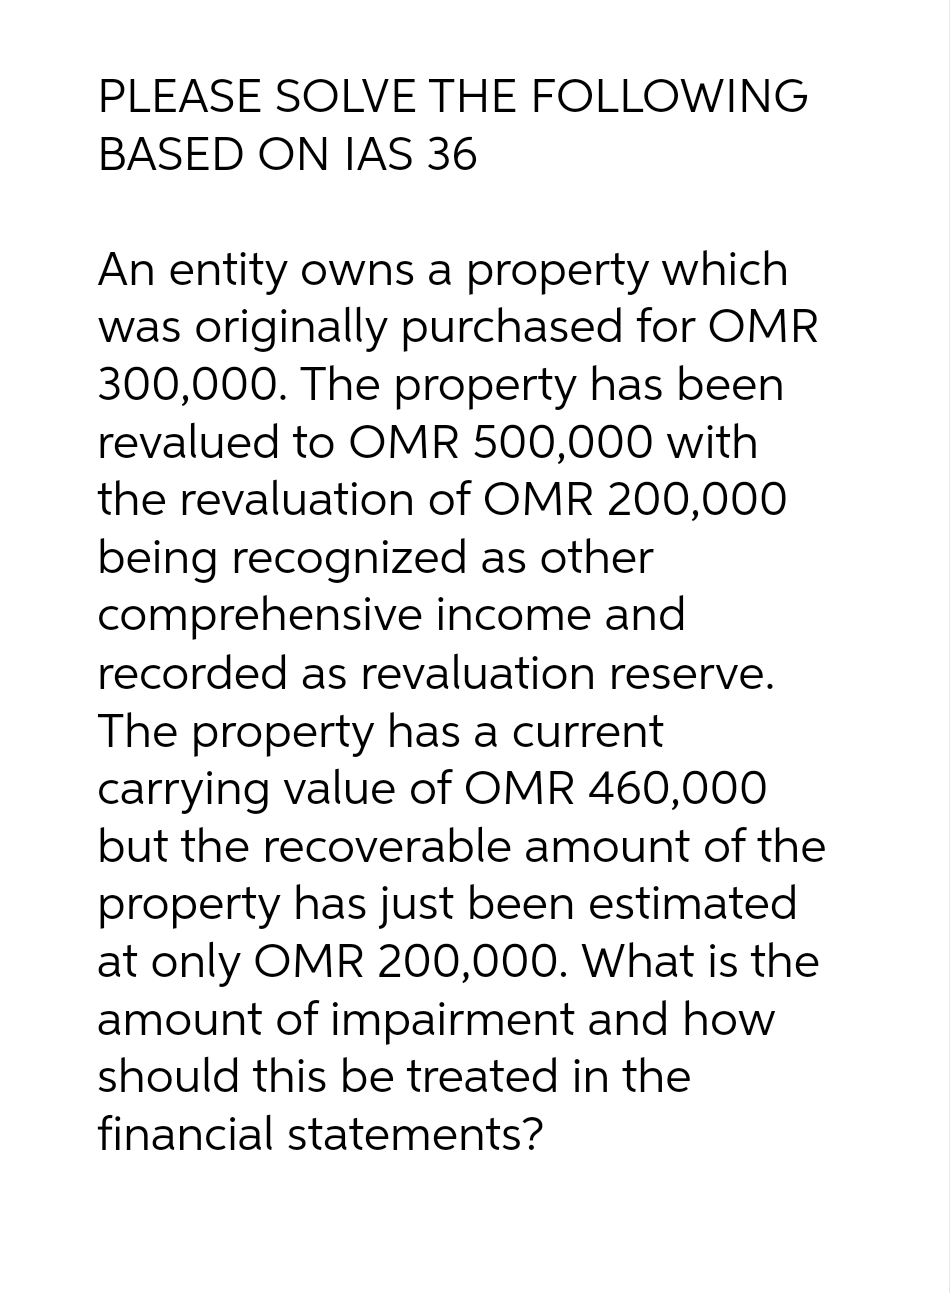 PLEASE SOLVE THE FOLLOWING
BASED ON IAS 36
An entity owns a property which
was originally purchased for OMR
300,000. The property has been
revalued to OMR 500,000 with
the revaluation of OMR 200,000
being recognized as other
comprehensive income and
recorded as revaluation reserve.
The property has a current
carrying value of OMR 460,000
but the recoverable amount of the
property has just been estimated
at only OMR 200,000. What is the
amount of impairment and how
should this be treated in the
financial statements?